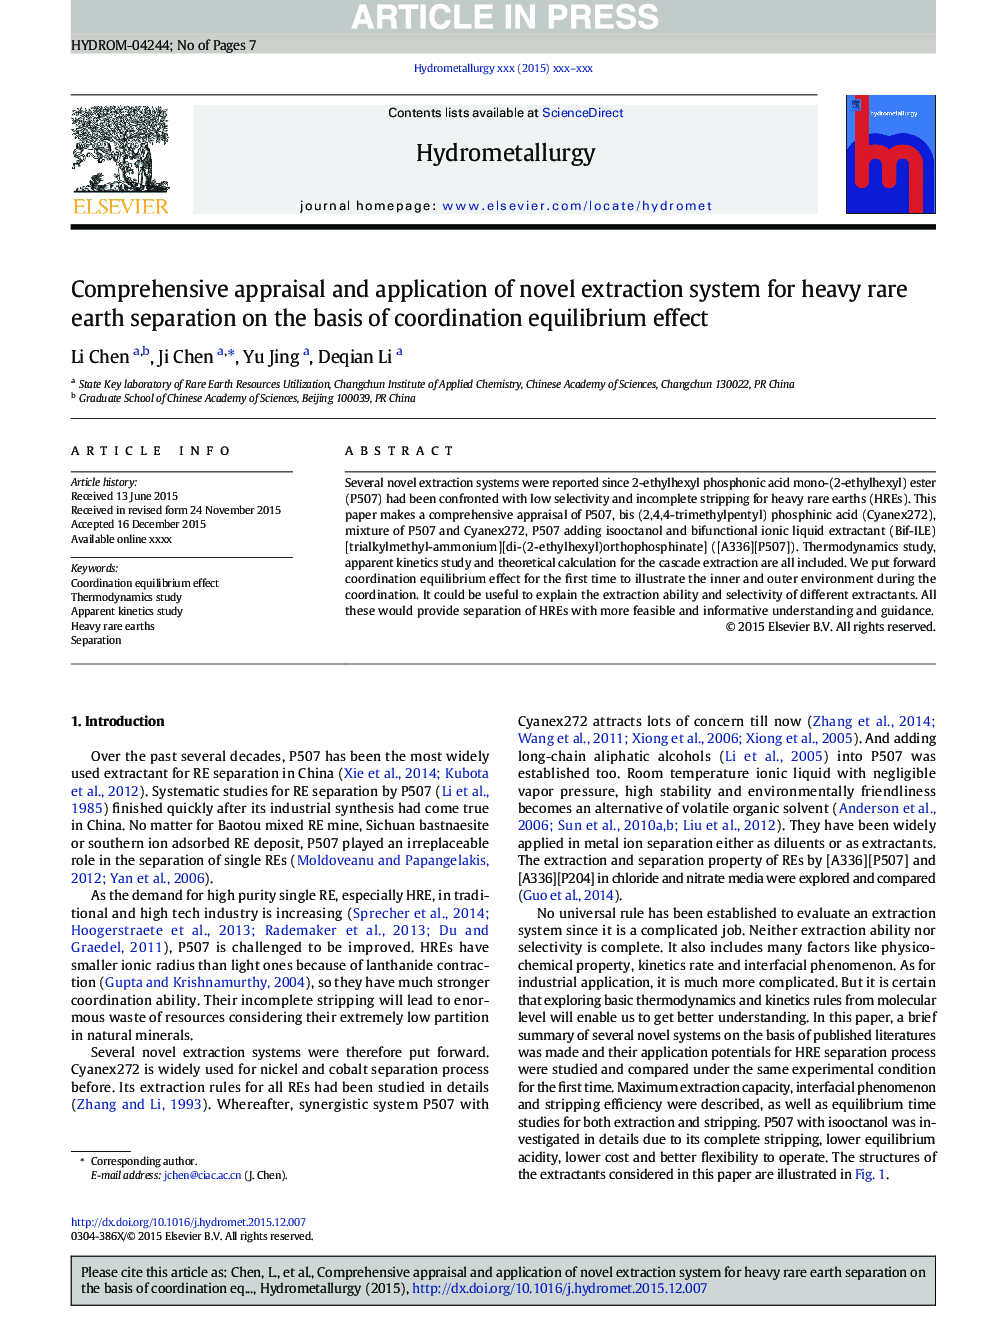 Comprehensive appraisal and application of novel extraction system for heavy rare earth separation on the basis of coordination equilibrium effect